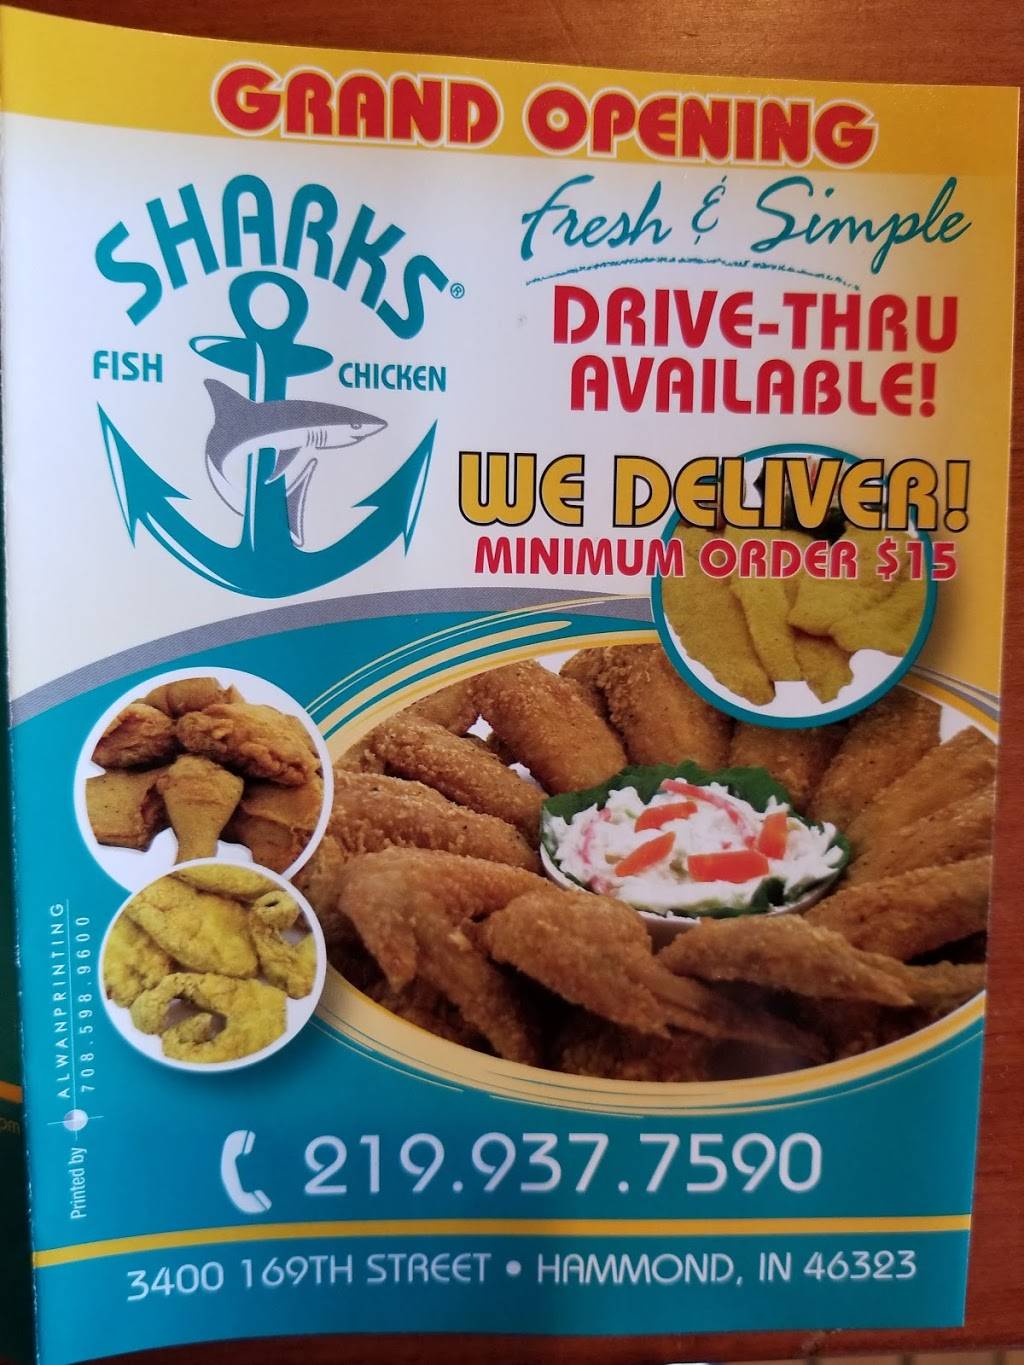 Sharks fish and Chicken Restaurant 3400 169th St